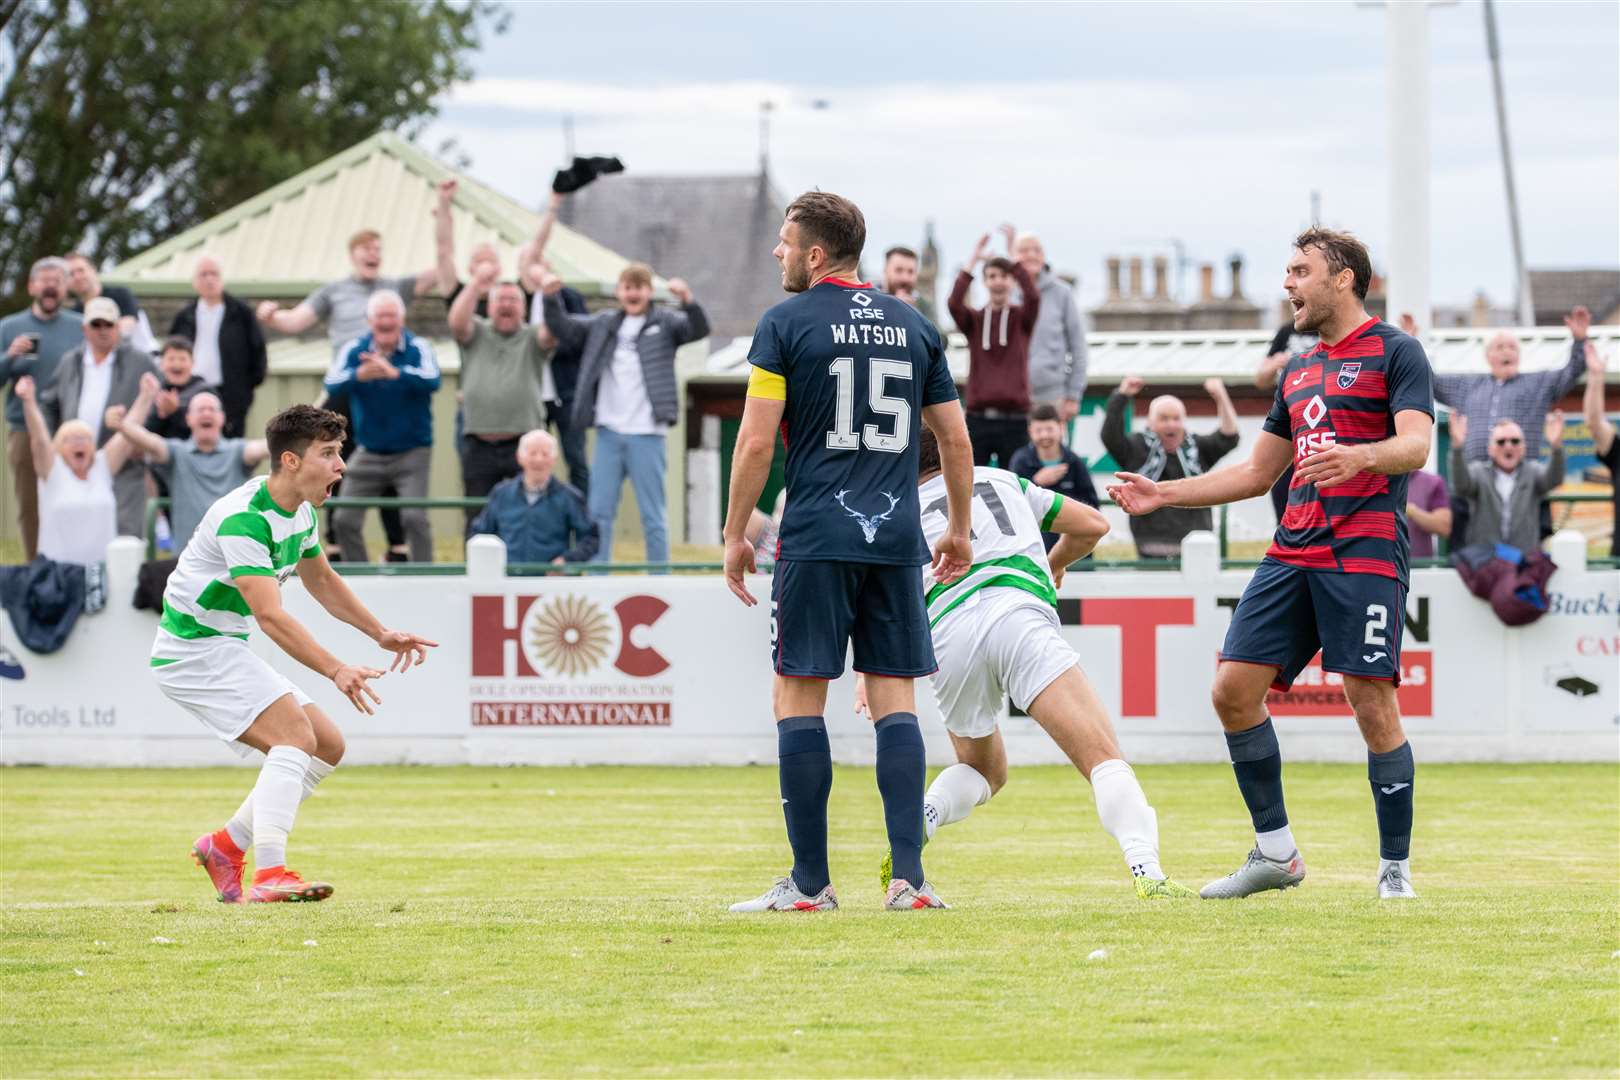 Buckie Thistle's Sam Urquhart (centre, hidden) wheels away to celebrate his opener with team mate Max Barry. ..Buckie Thistle (1) vs Ross County (1) - Ross County win the penalty shootout - Premier Sports League Cup at Victoria Park, Buckie, 09/07/2022...Picture: Daniel Forsyth..